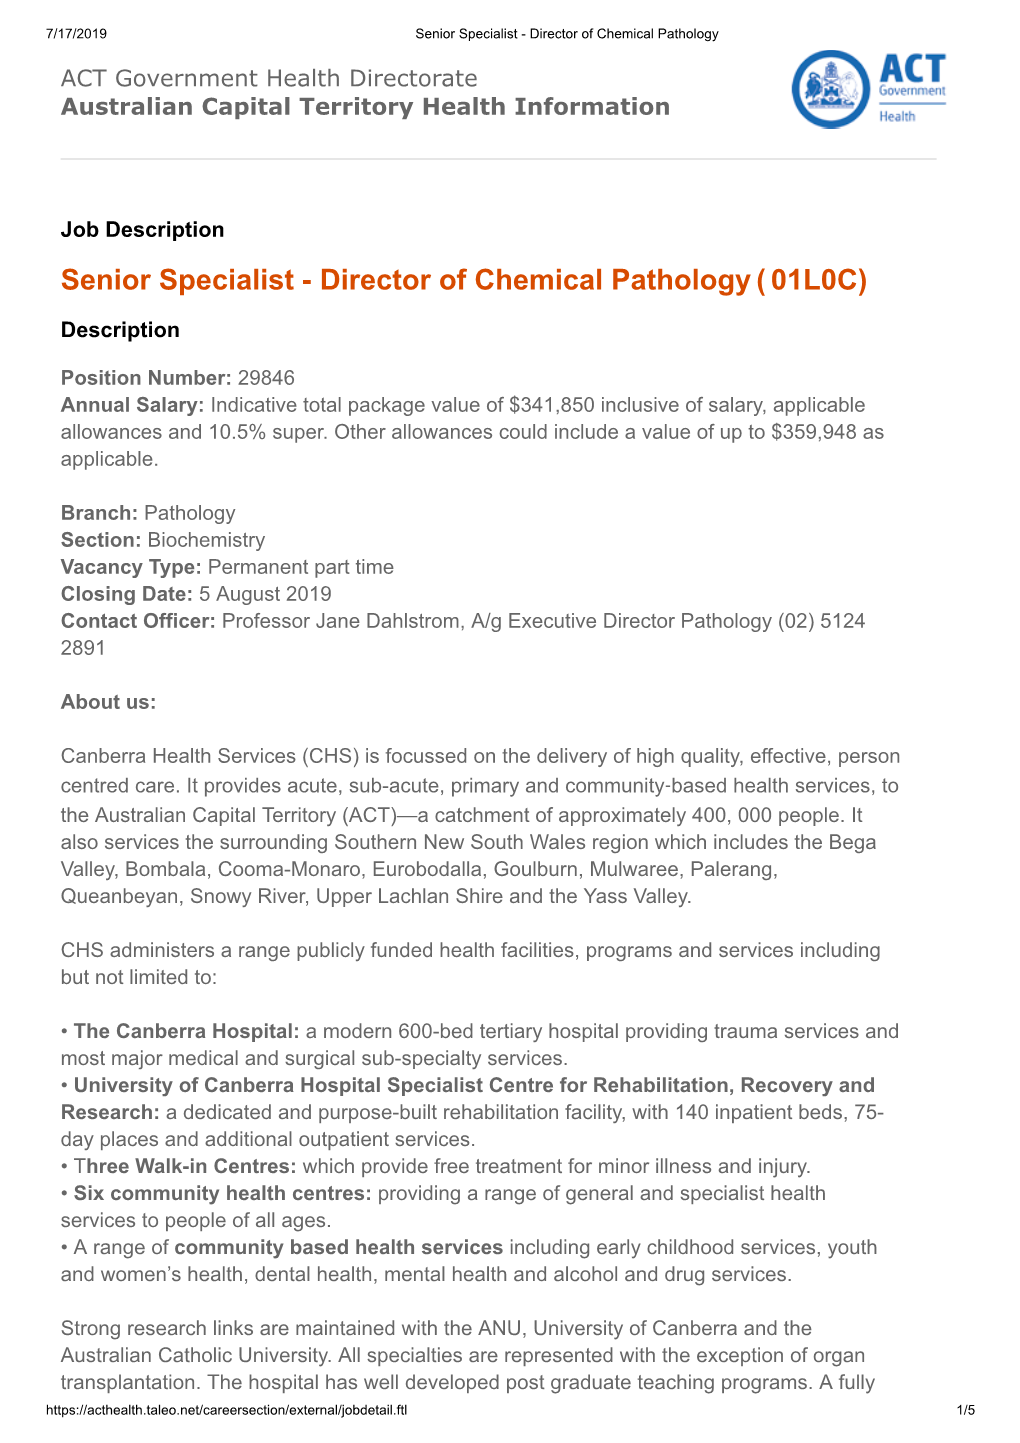 Senior Specialist - Director of Chemical Pathology